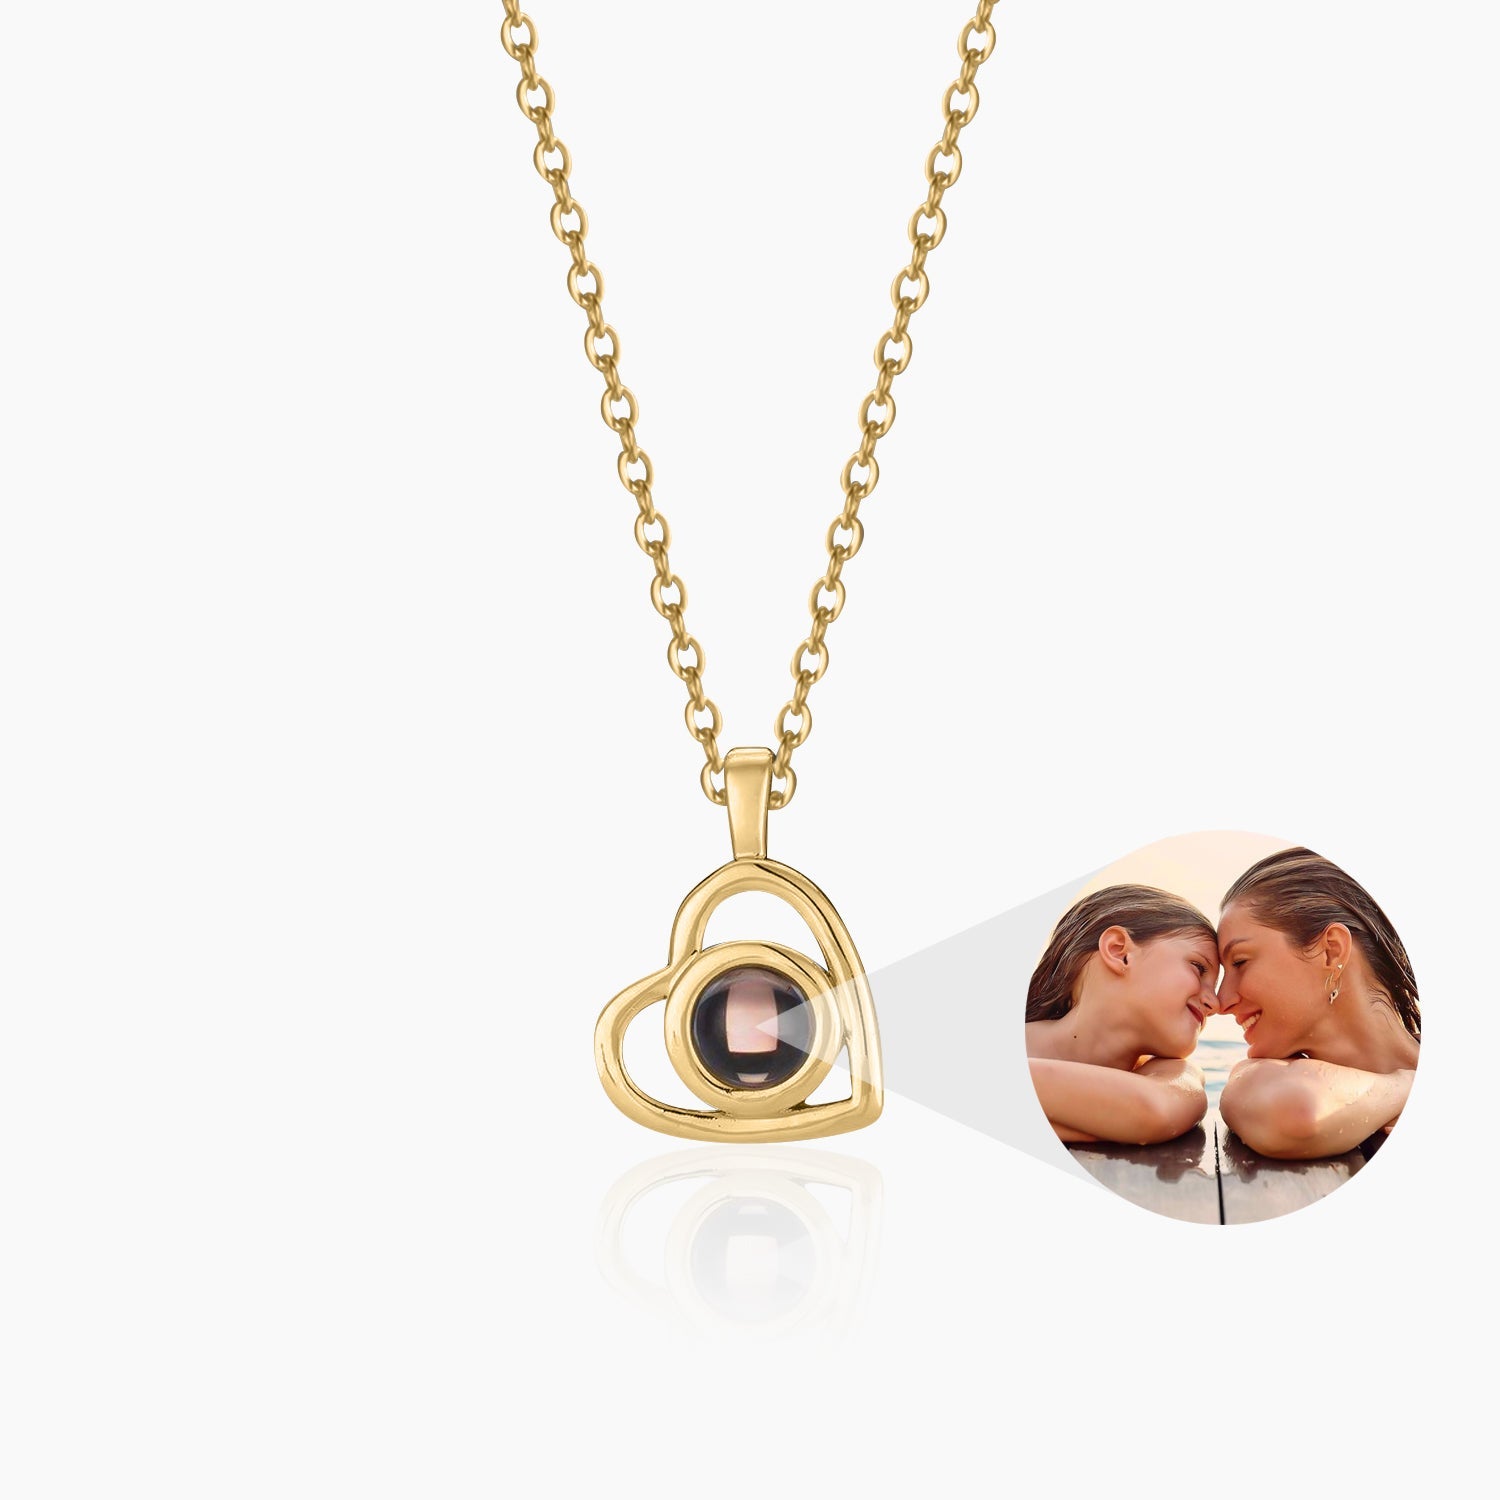 Heart Photo Necklace